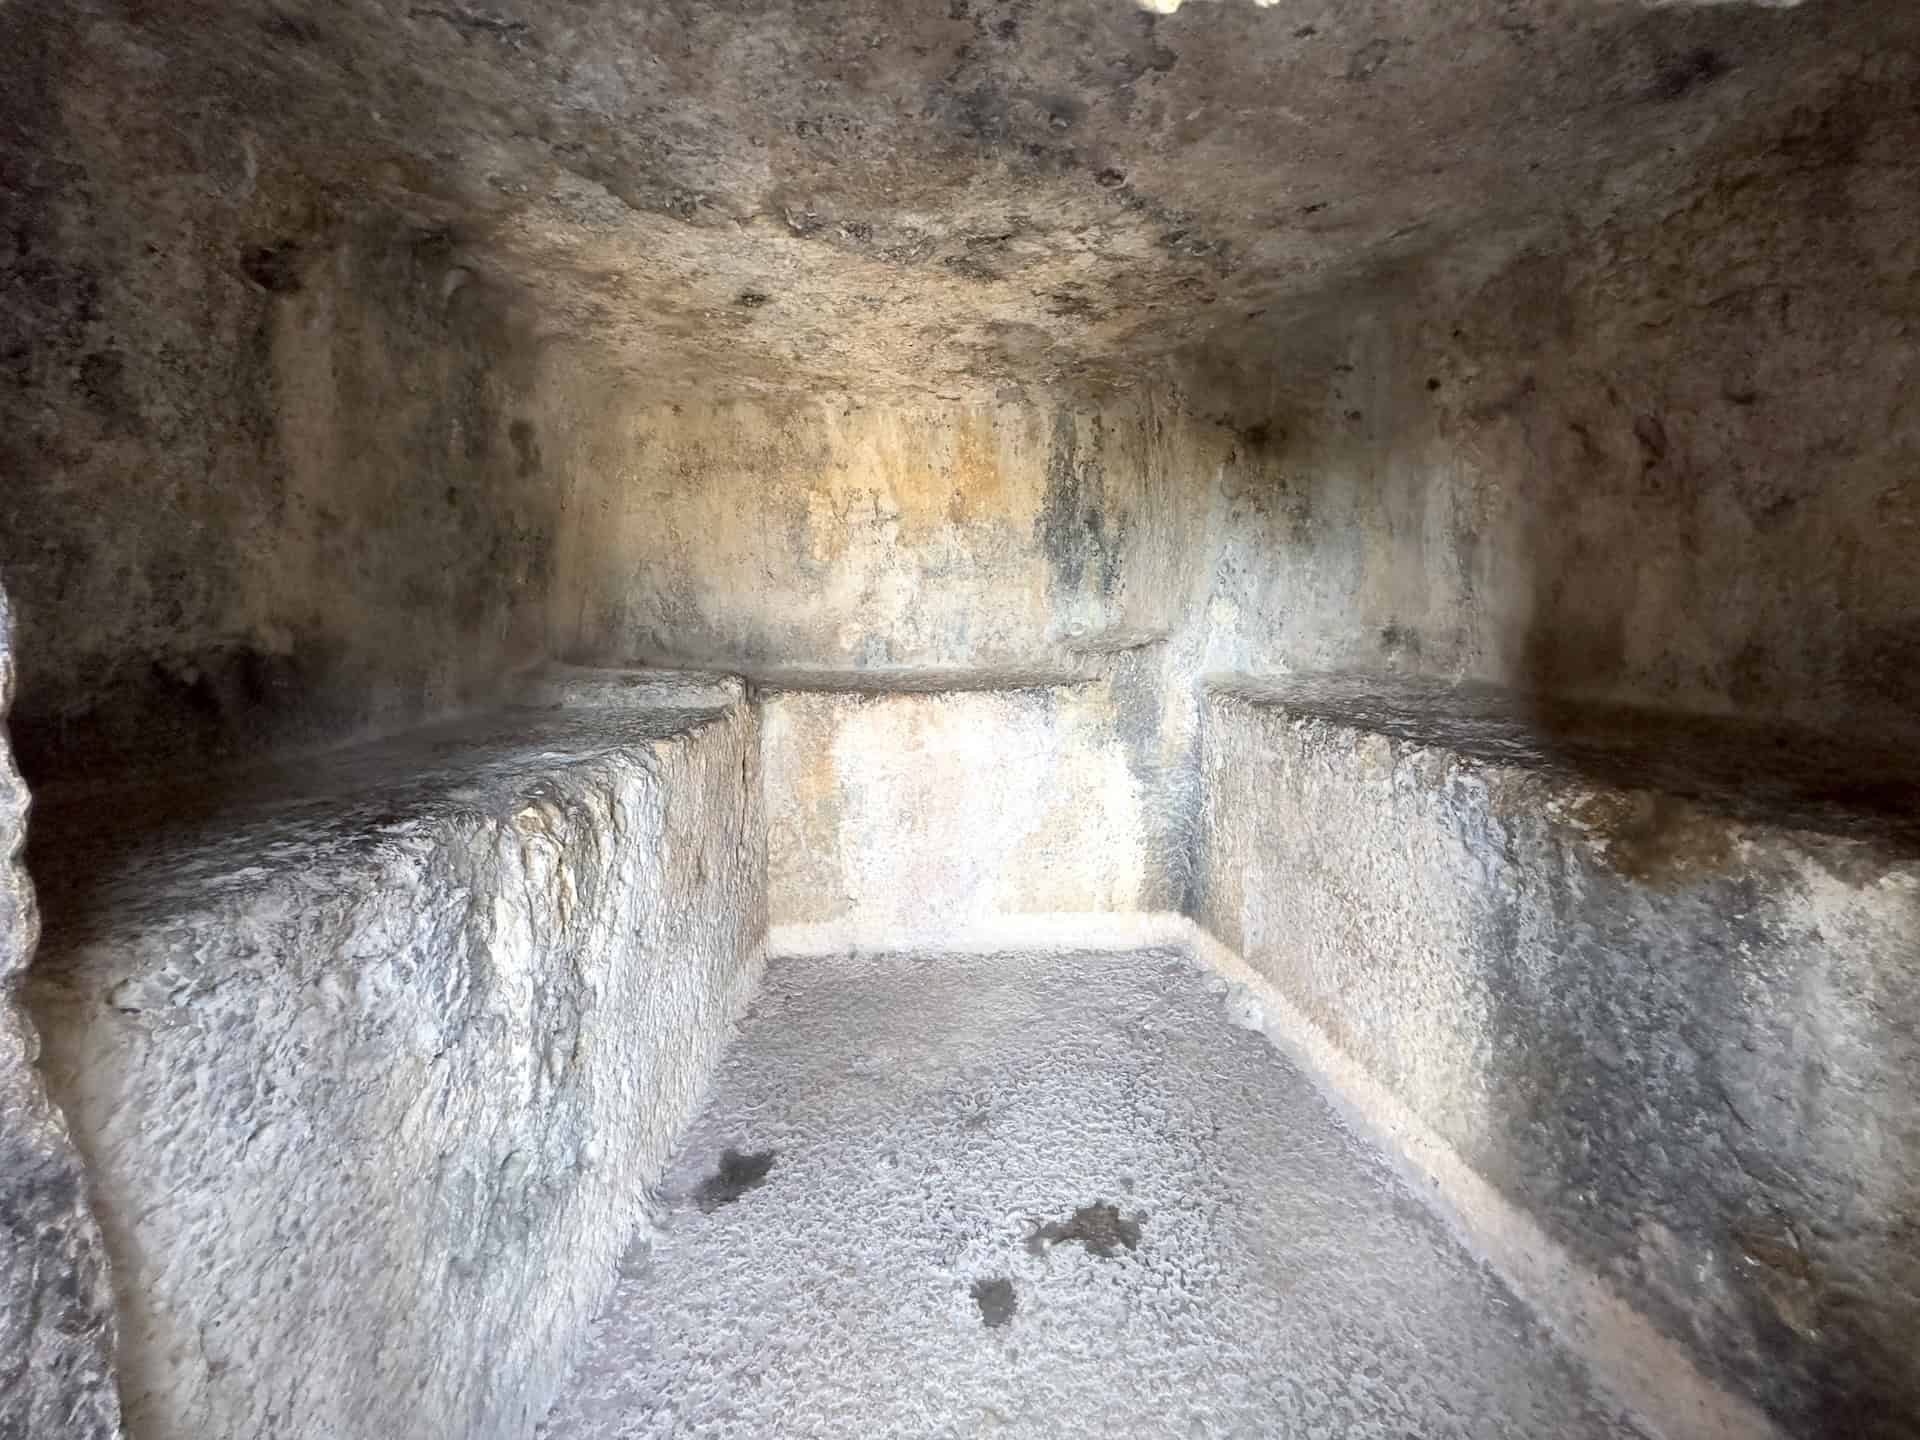 Burial chamber of the Tomb of Amyntas at the Amyntas Rock Tombs